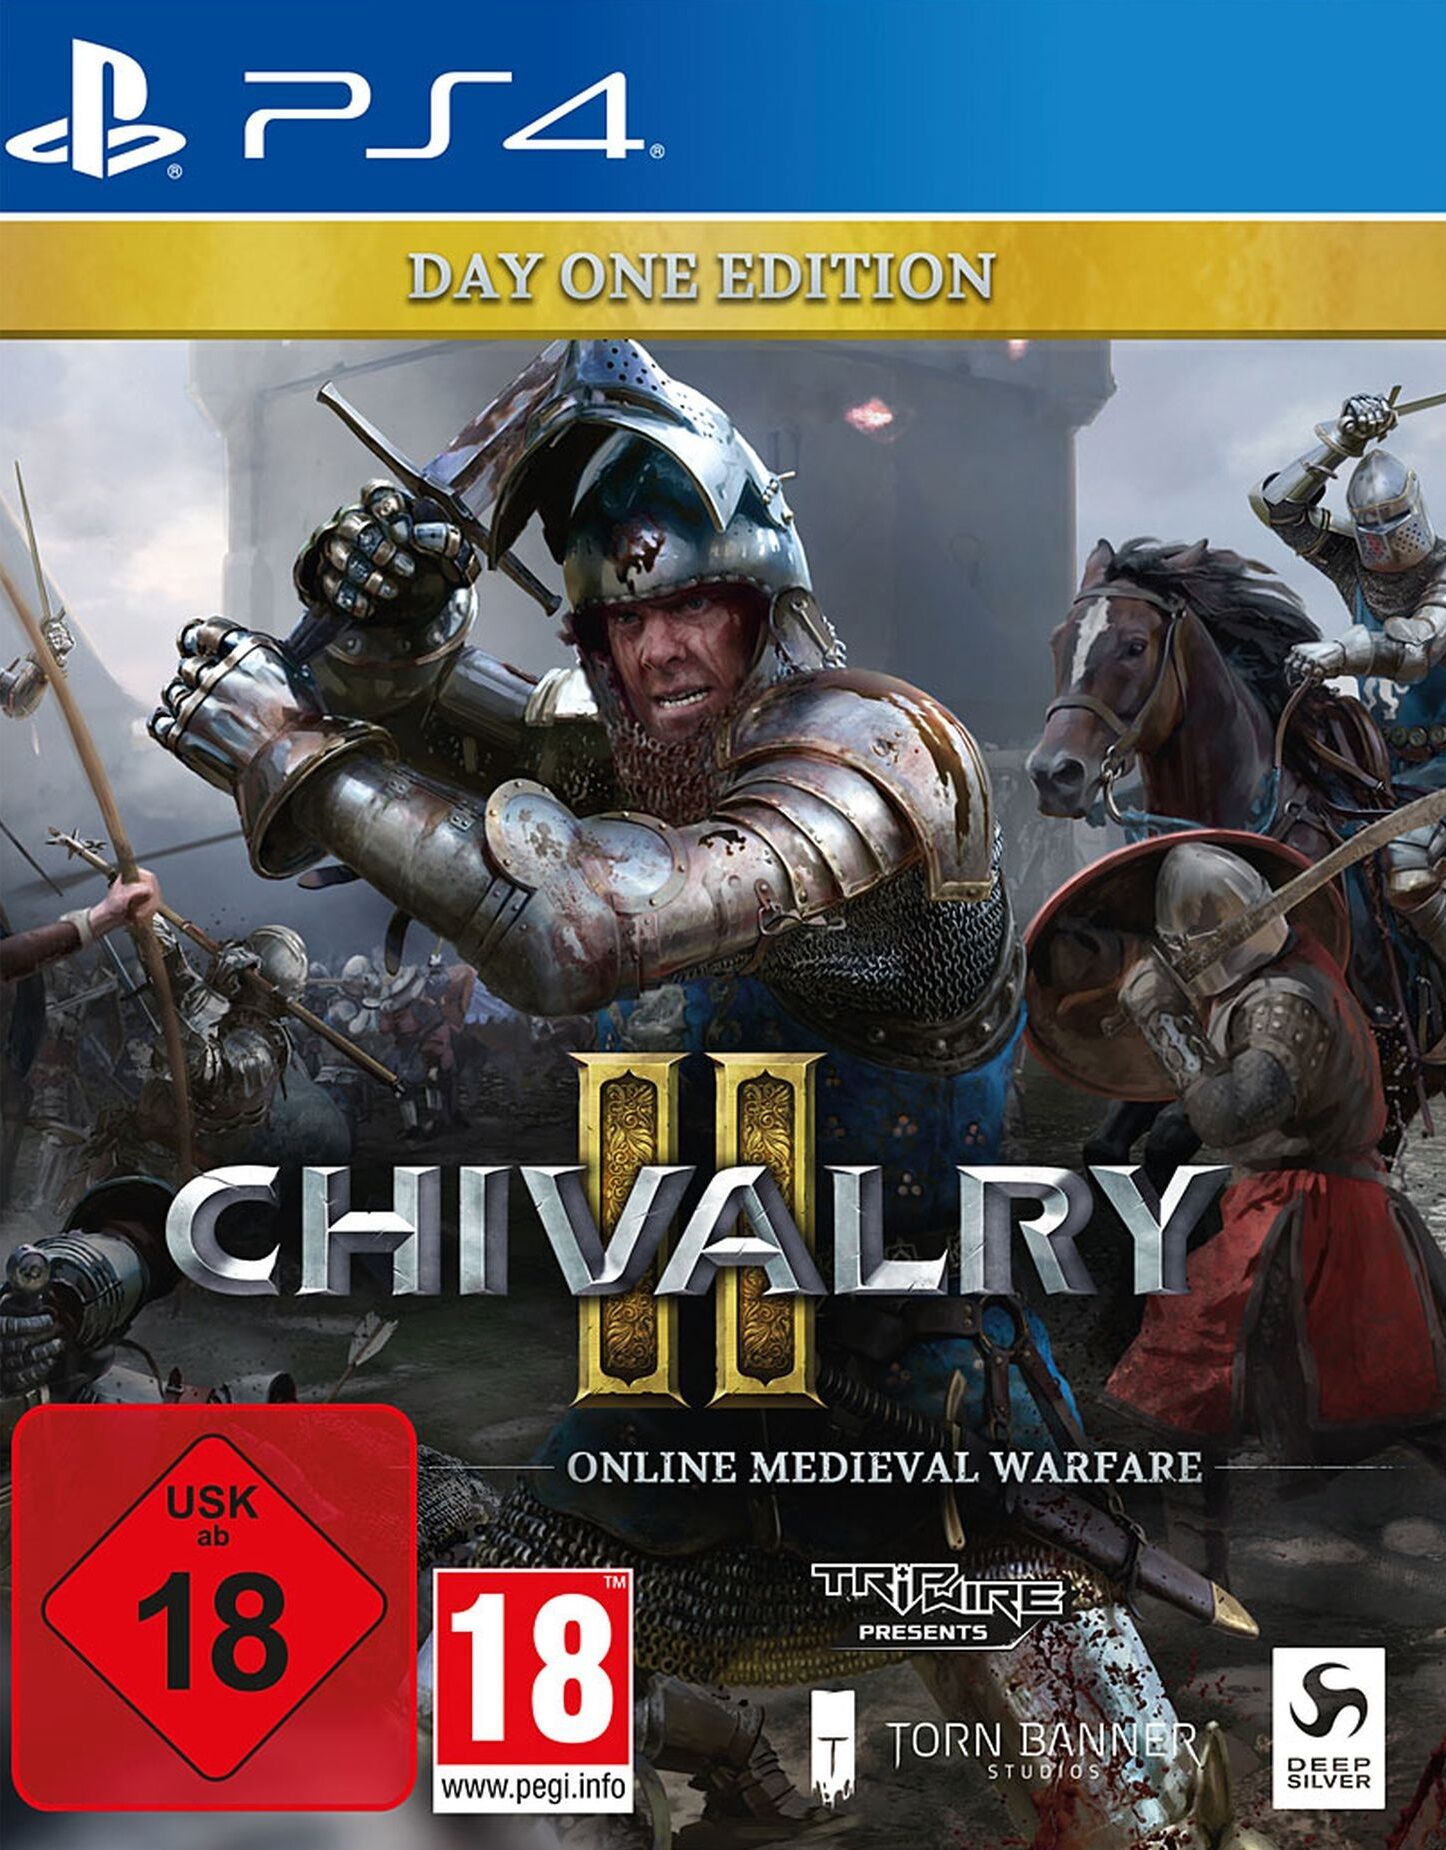 Deep Silver - Chivalry 2 - Day 1 Edition [PS4] (D)